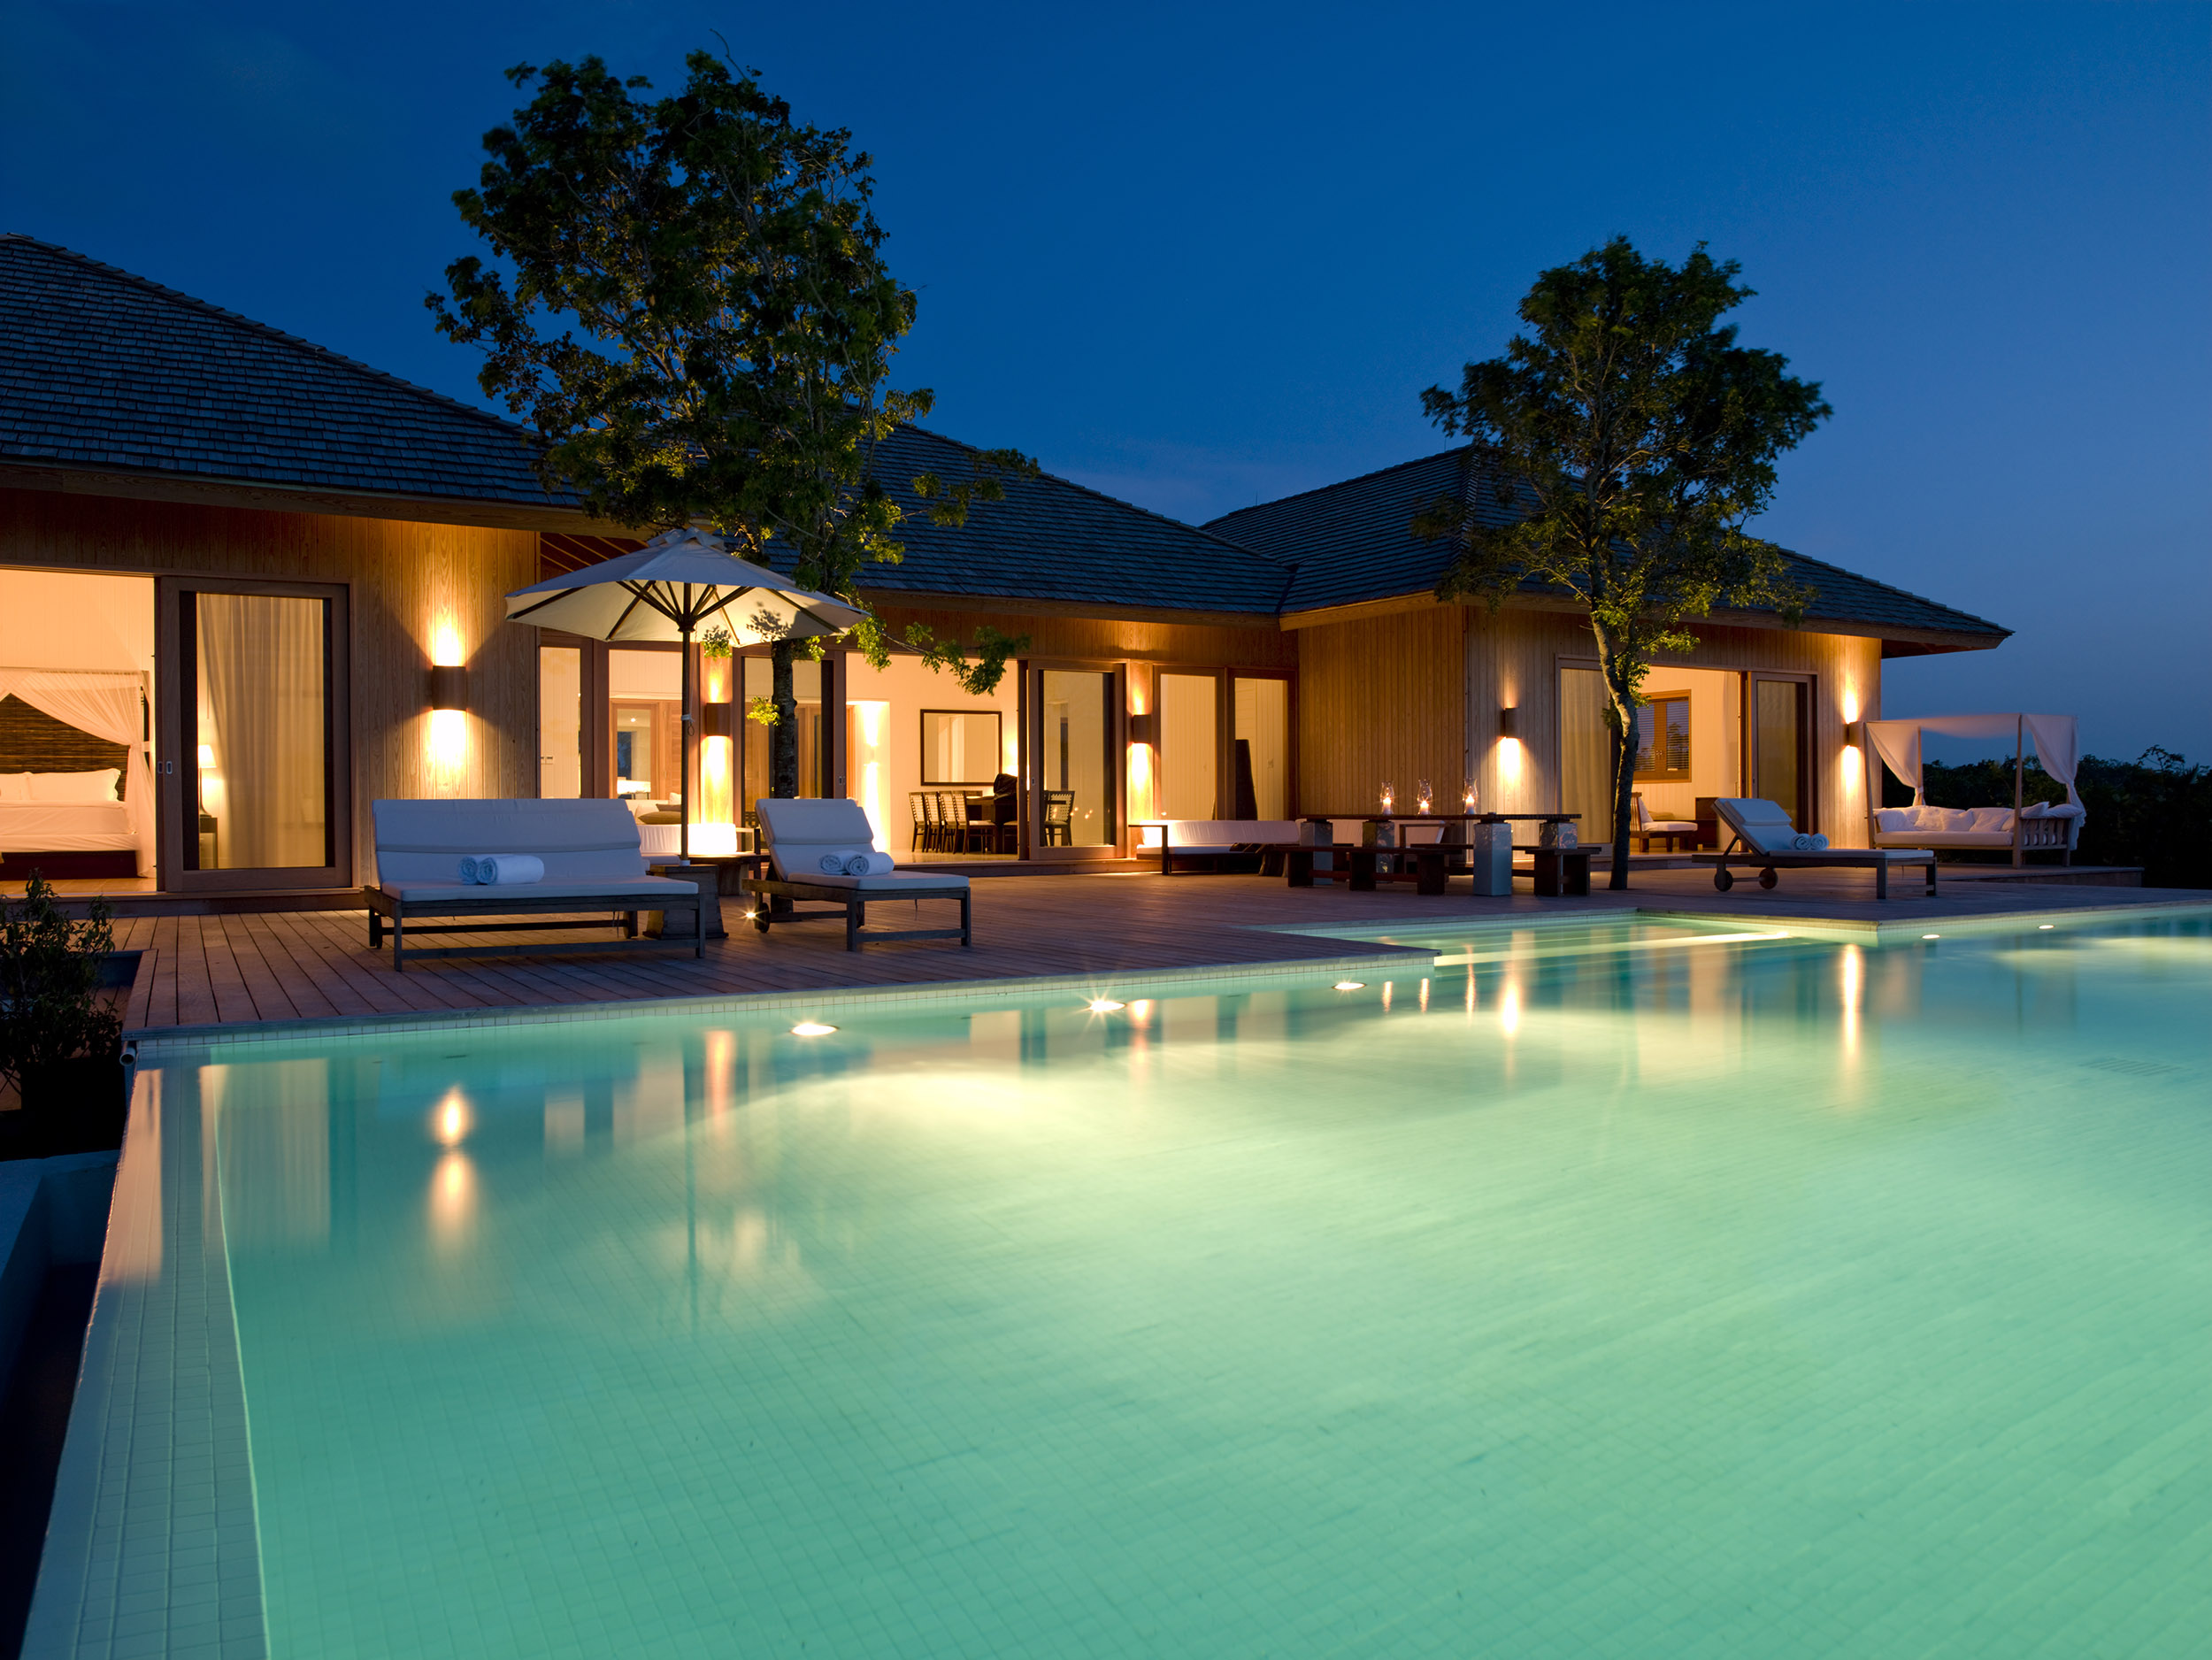 Parrot Cay - evening view of the villa and swimming pool